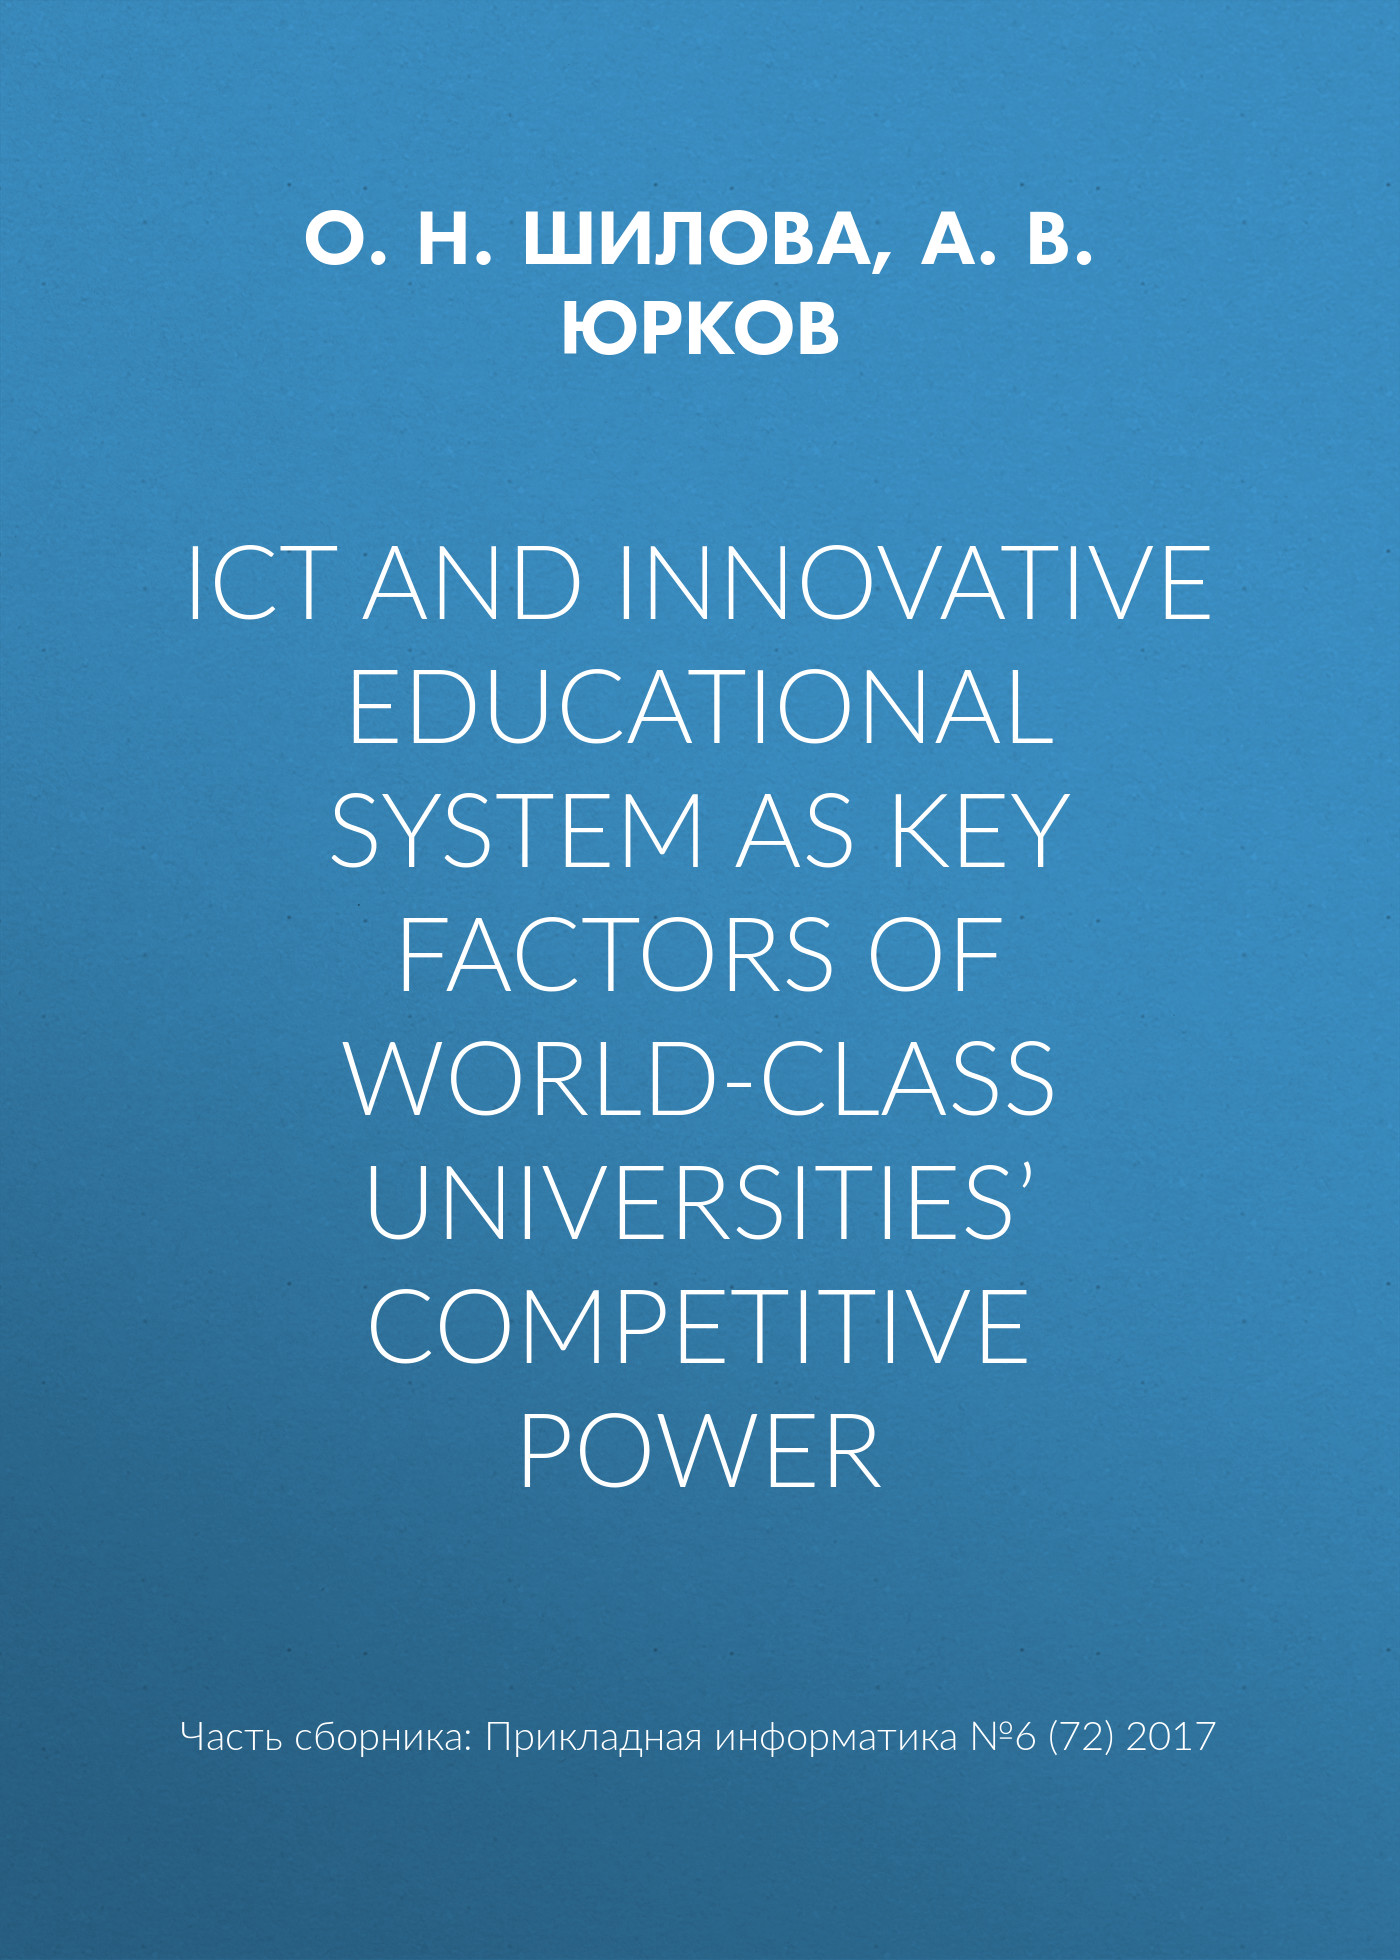 ICT and innovative educational system as key factors of world-class universities’ competitive power